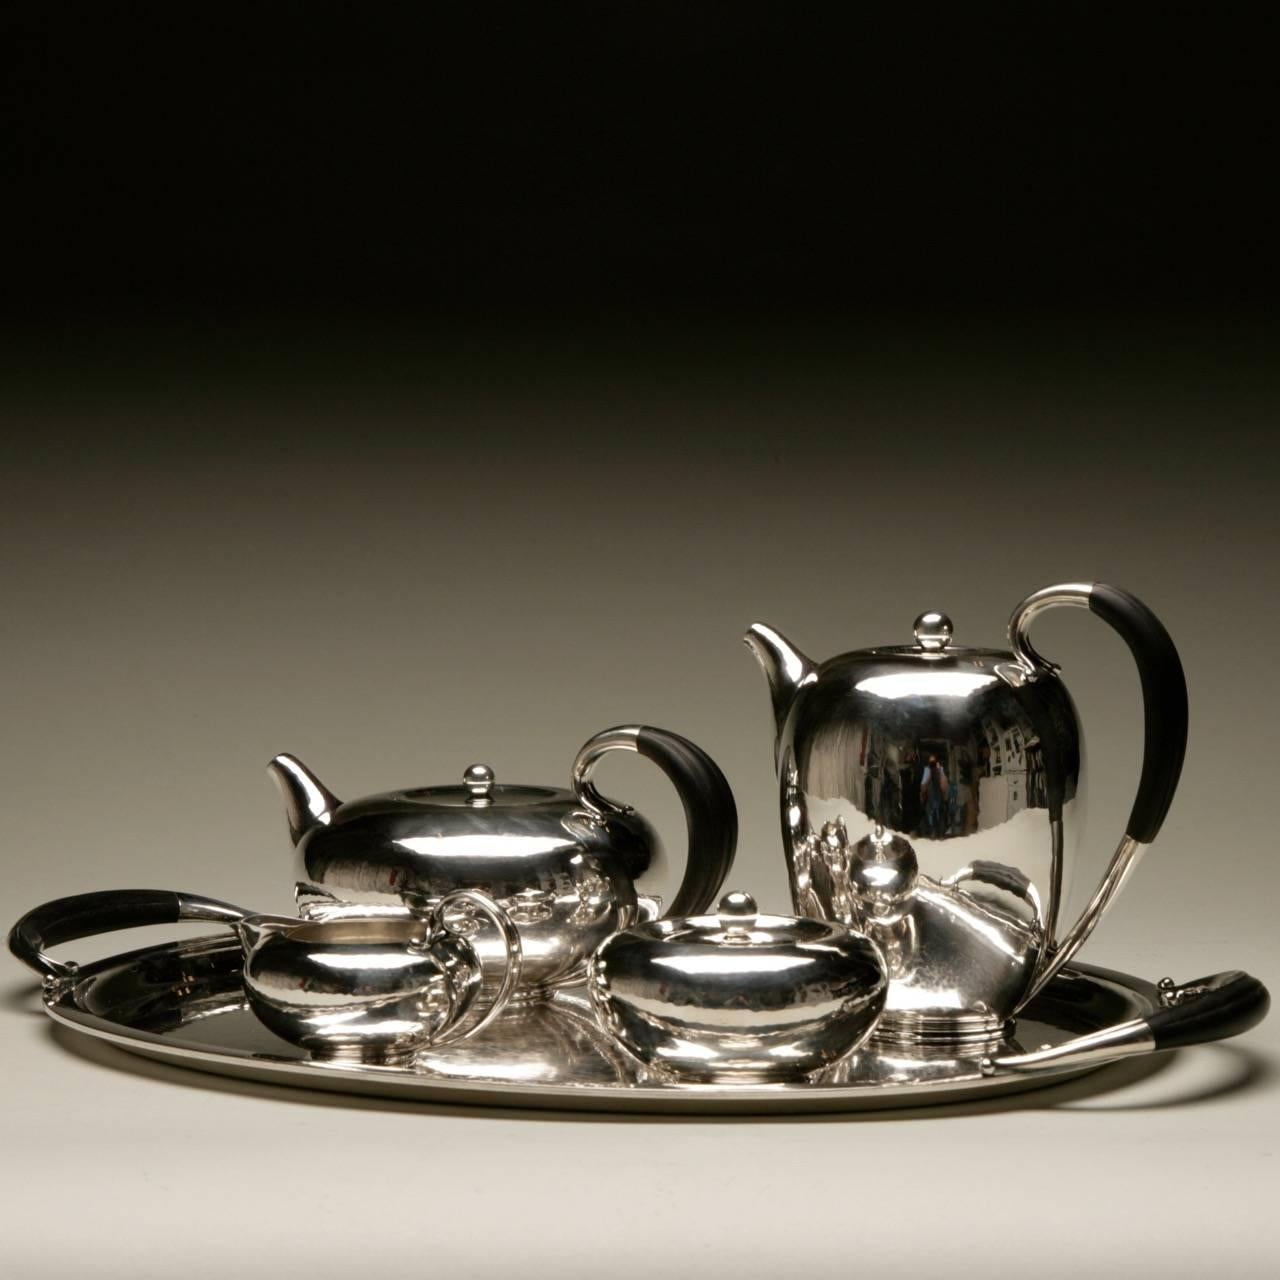 Georg Jensen sterling silver Art Deco coffee and tea service no.787 by Johan Rohde

 

A lovely Art Deco service with a low slung bodies having a contemporary Japonesque feel. Designed by Johan Rohde in 1933. Rare to find with matching tray.